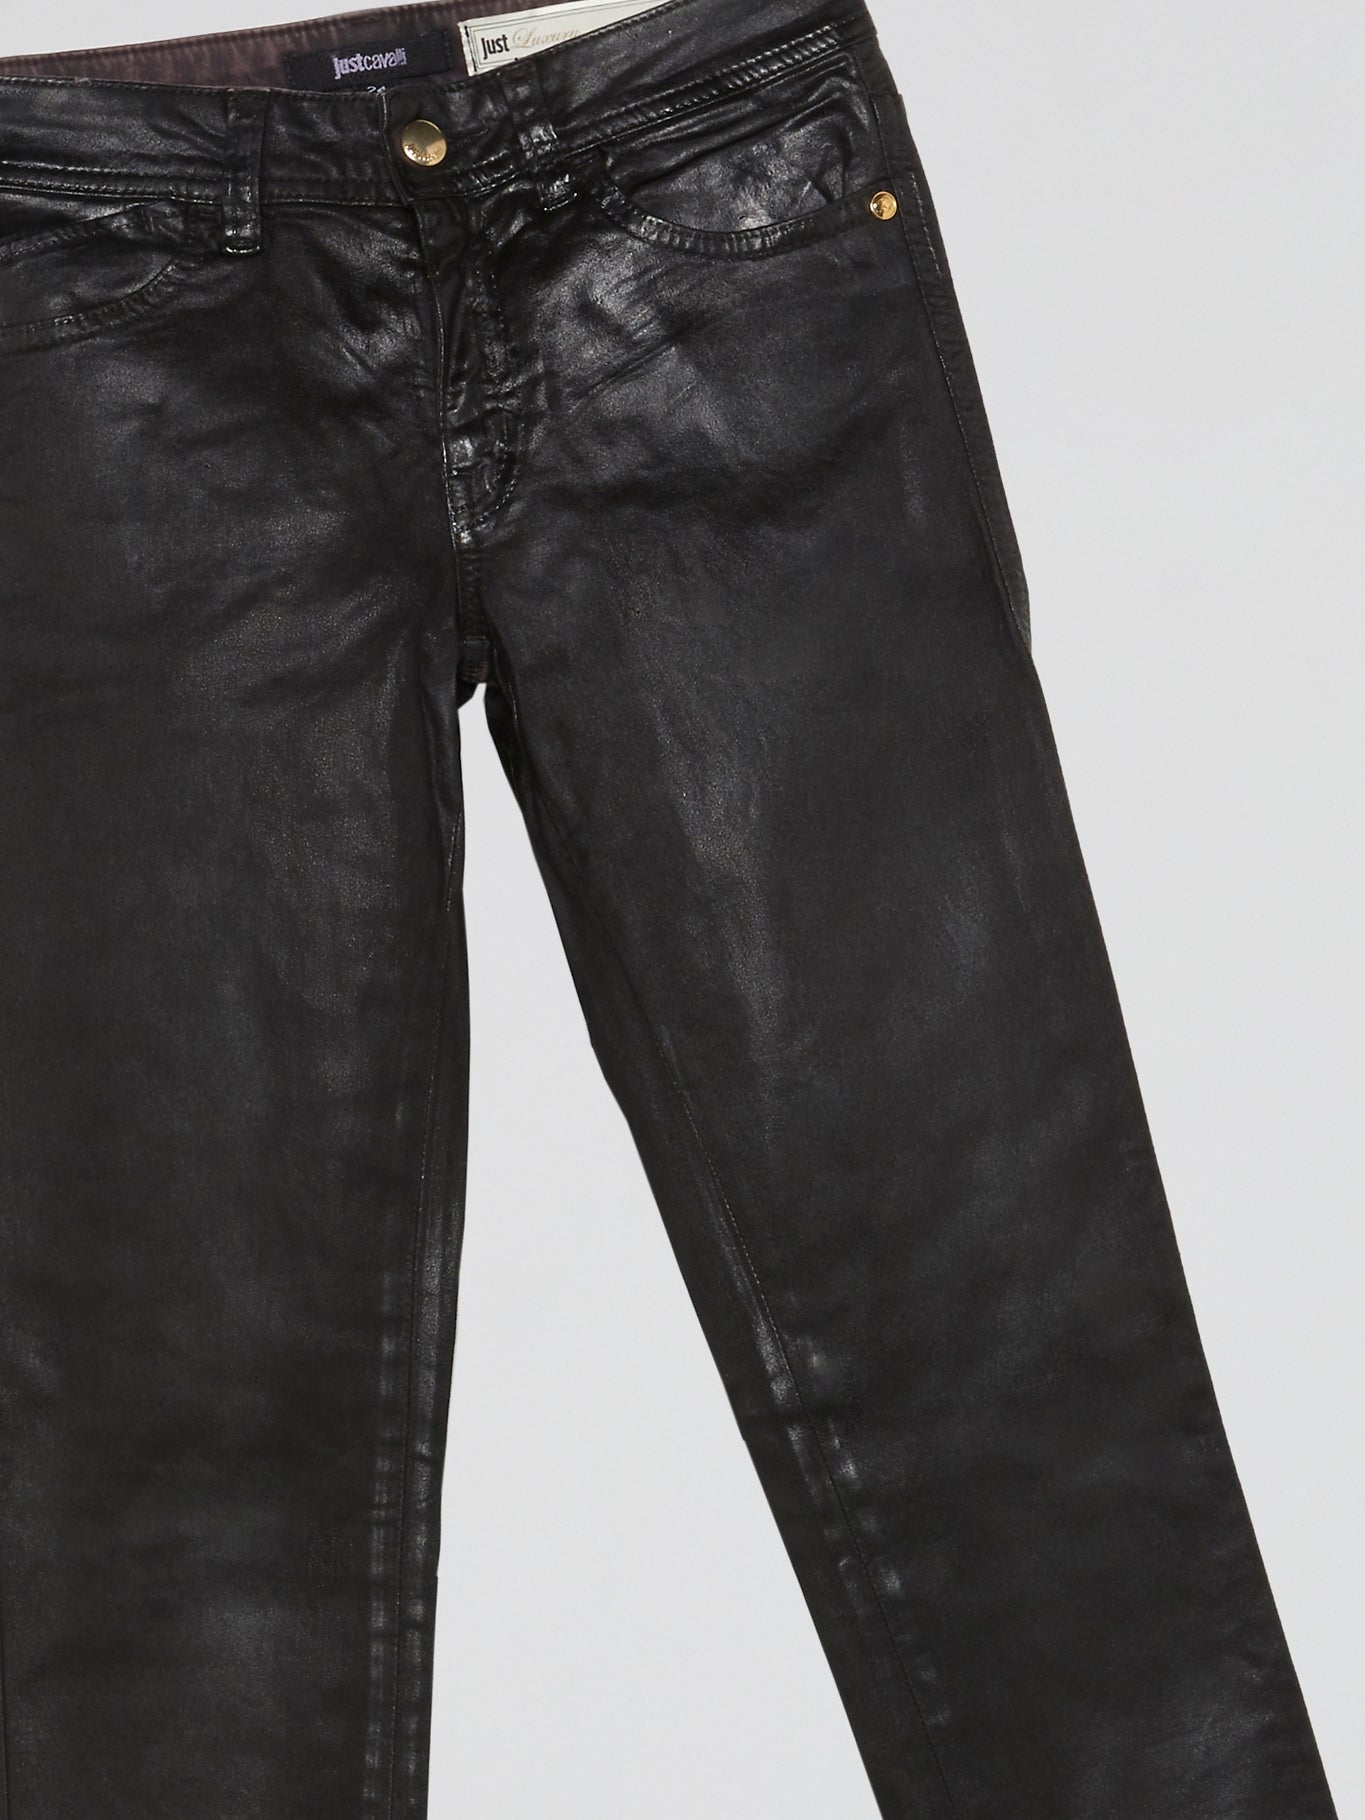 Black Coated Skinny Trousers, ONLY